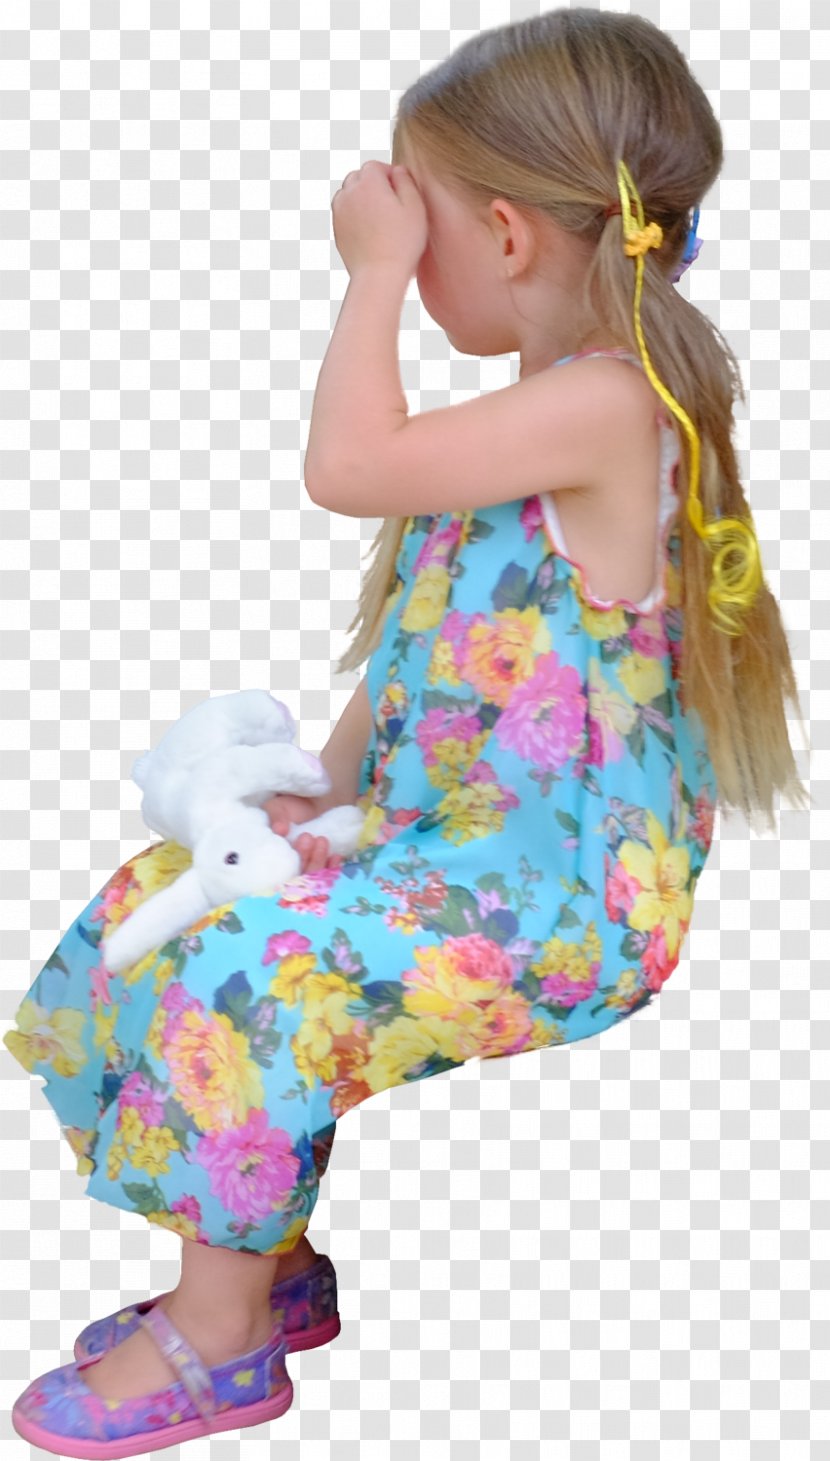 Child Toddler Creativity - Toy Transparent PNG